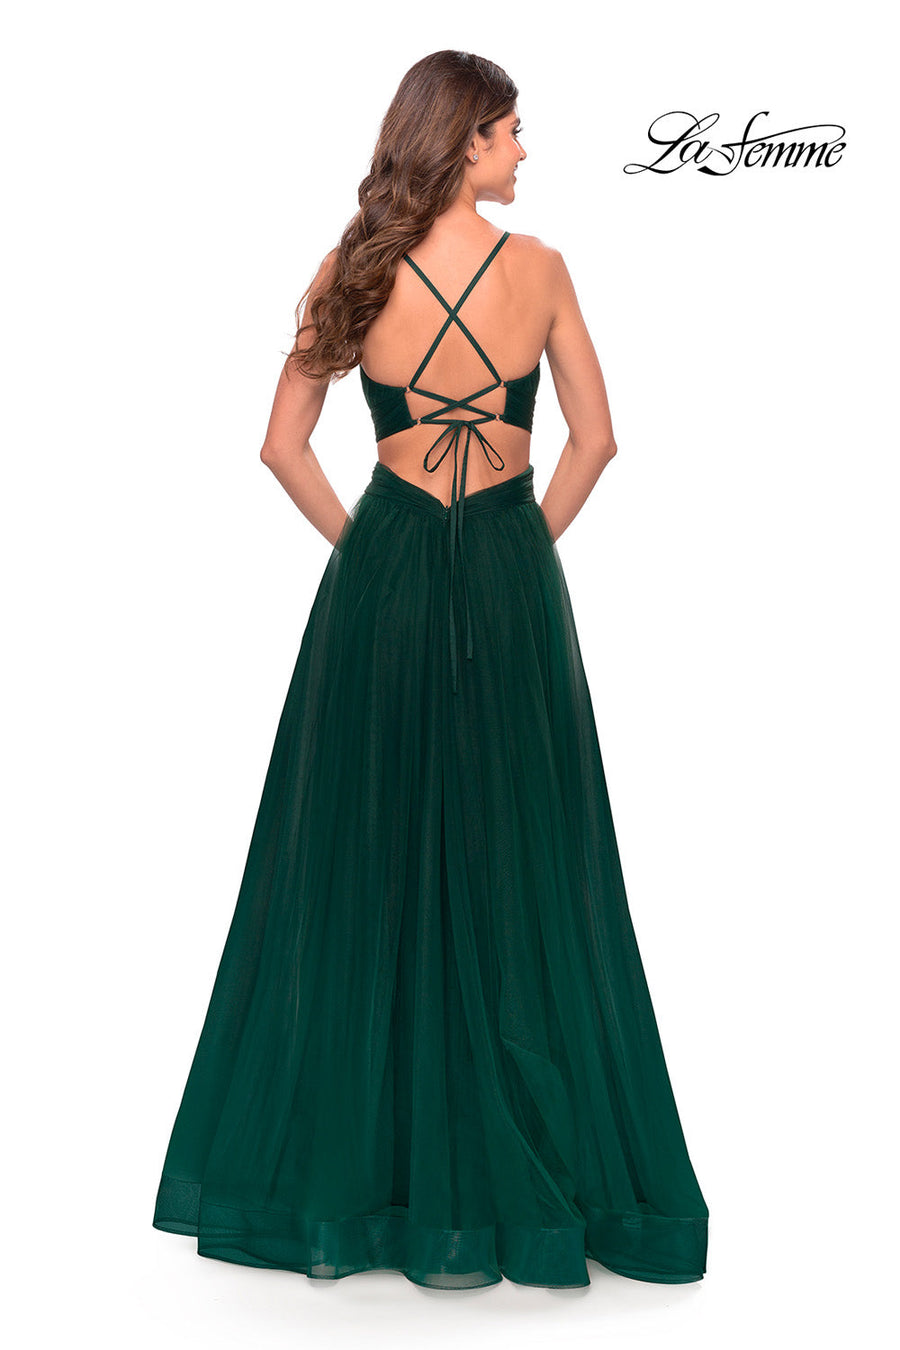 La Femme 31347 prom dress images.  La Femme 31347 is available in these colors: Dark Emerald, Red, Royal Blue.